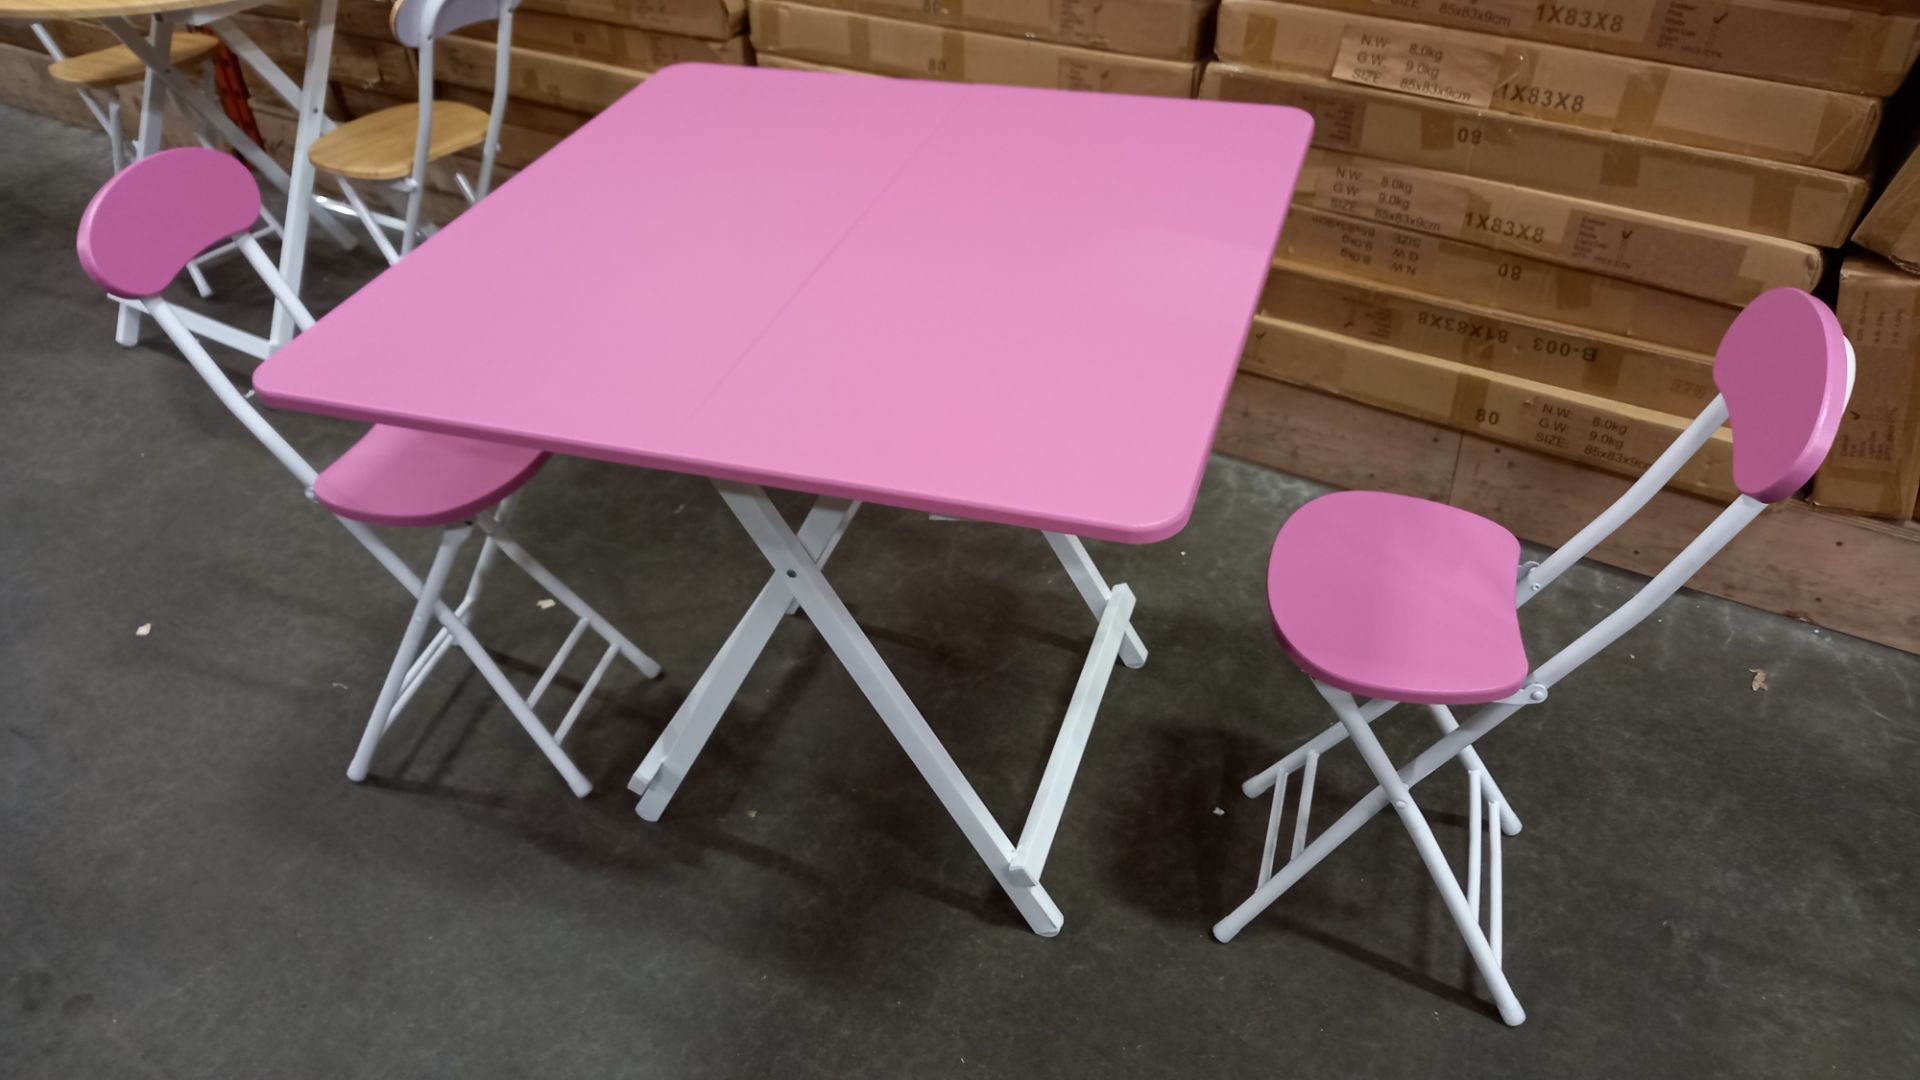 2 X PINK COLOURED 80 X 80 CM SQUARE TABLES AND 4 X PINK FOLDABLE CHAIRS (GRADED GOOD CONDITION) -